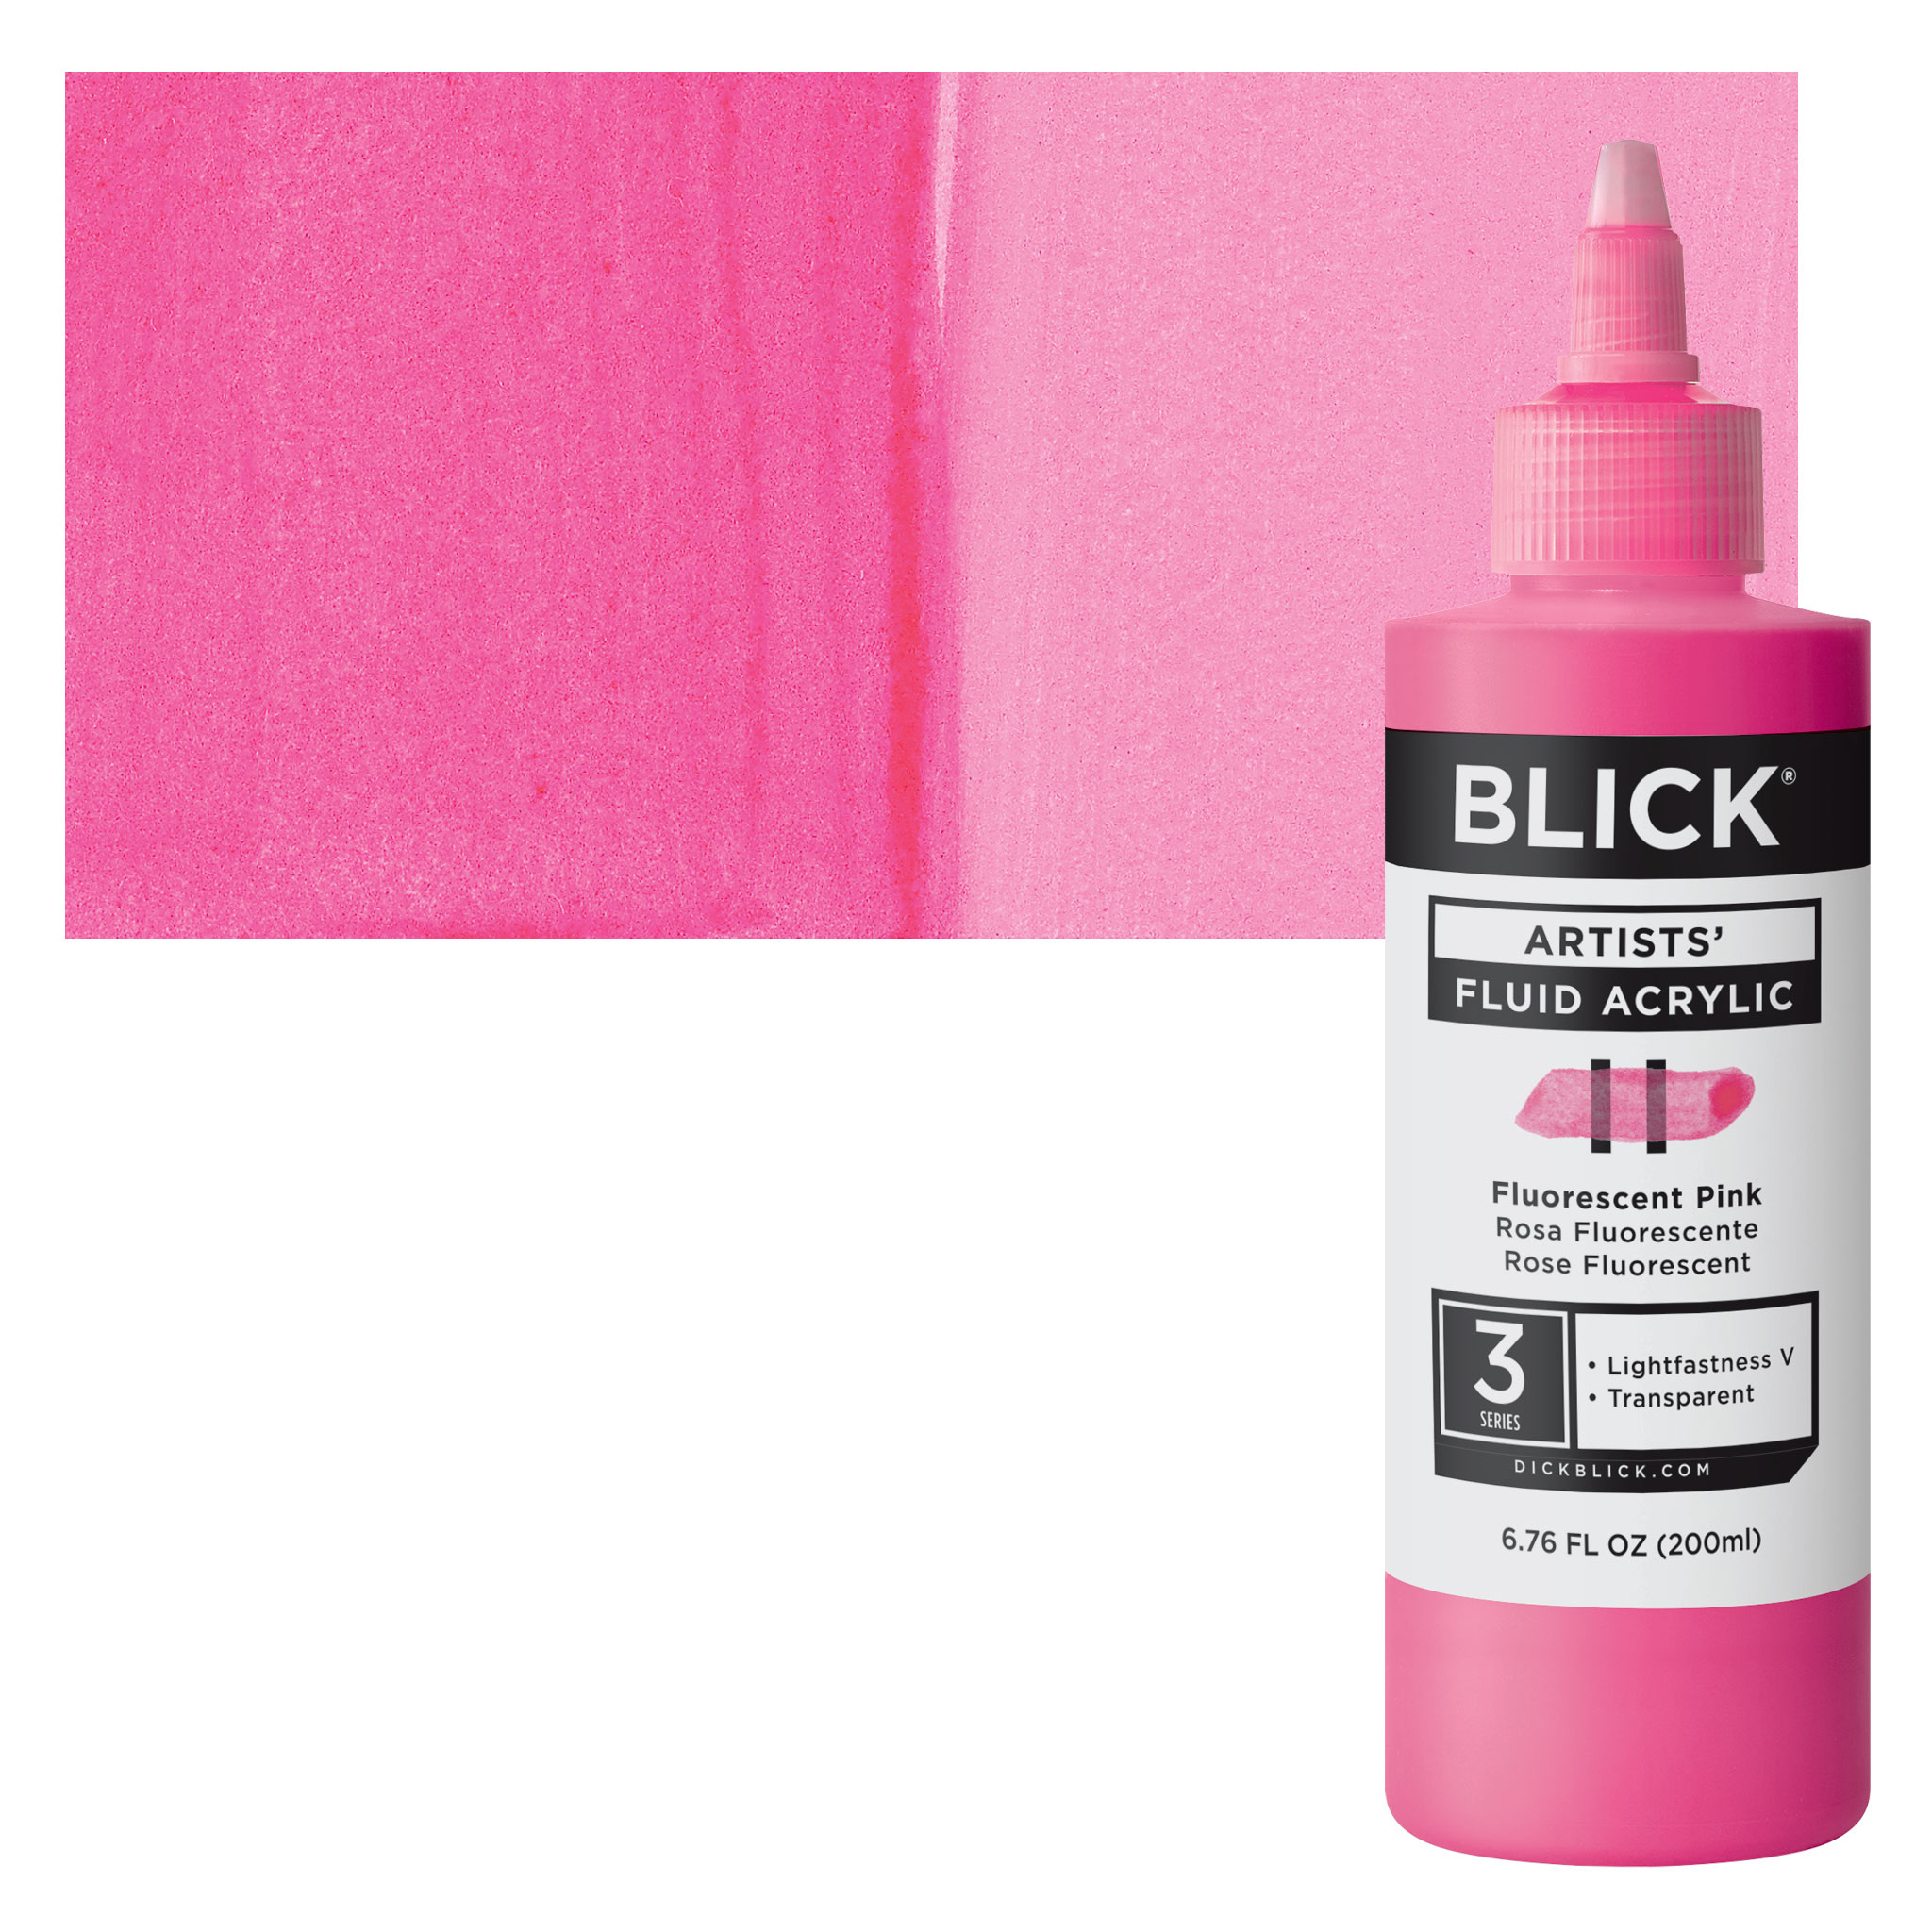 Our lowest prices of the season on your go-to acrylics - Blick Art